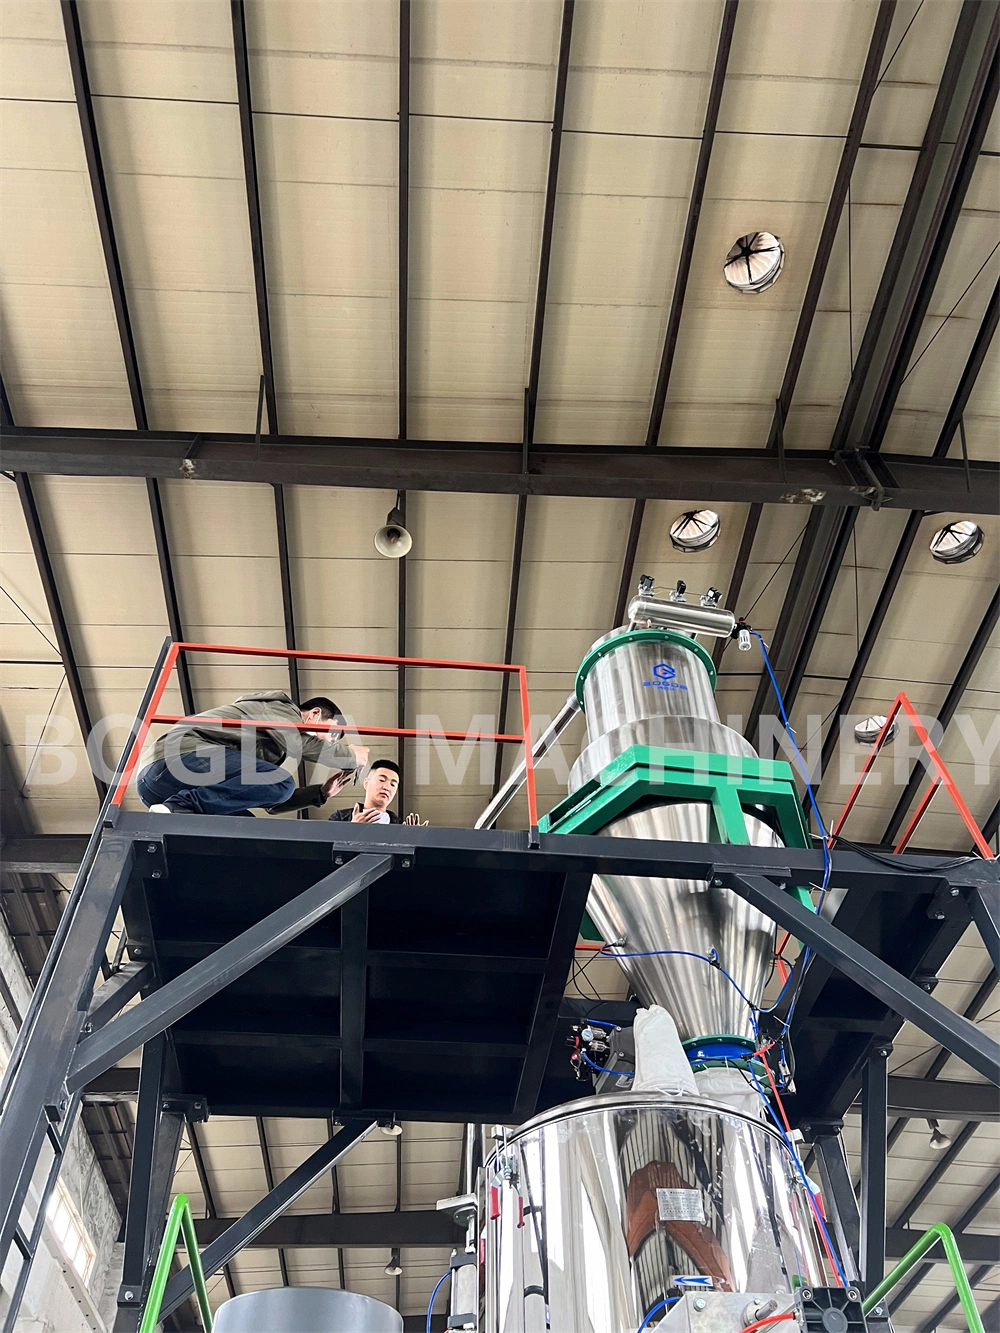 Automatic Feeding Gravimetric Dosing Batching Weighing Mixing Conveying System for PVC Compounding Mixing Small Additive